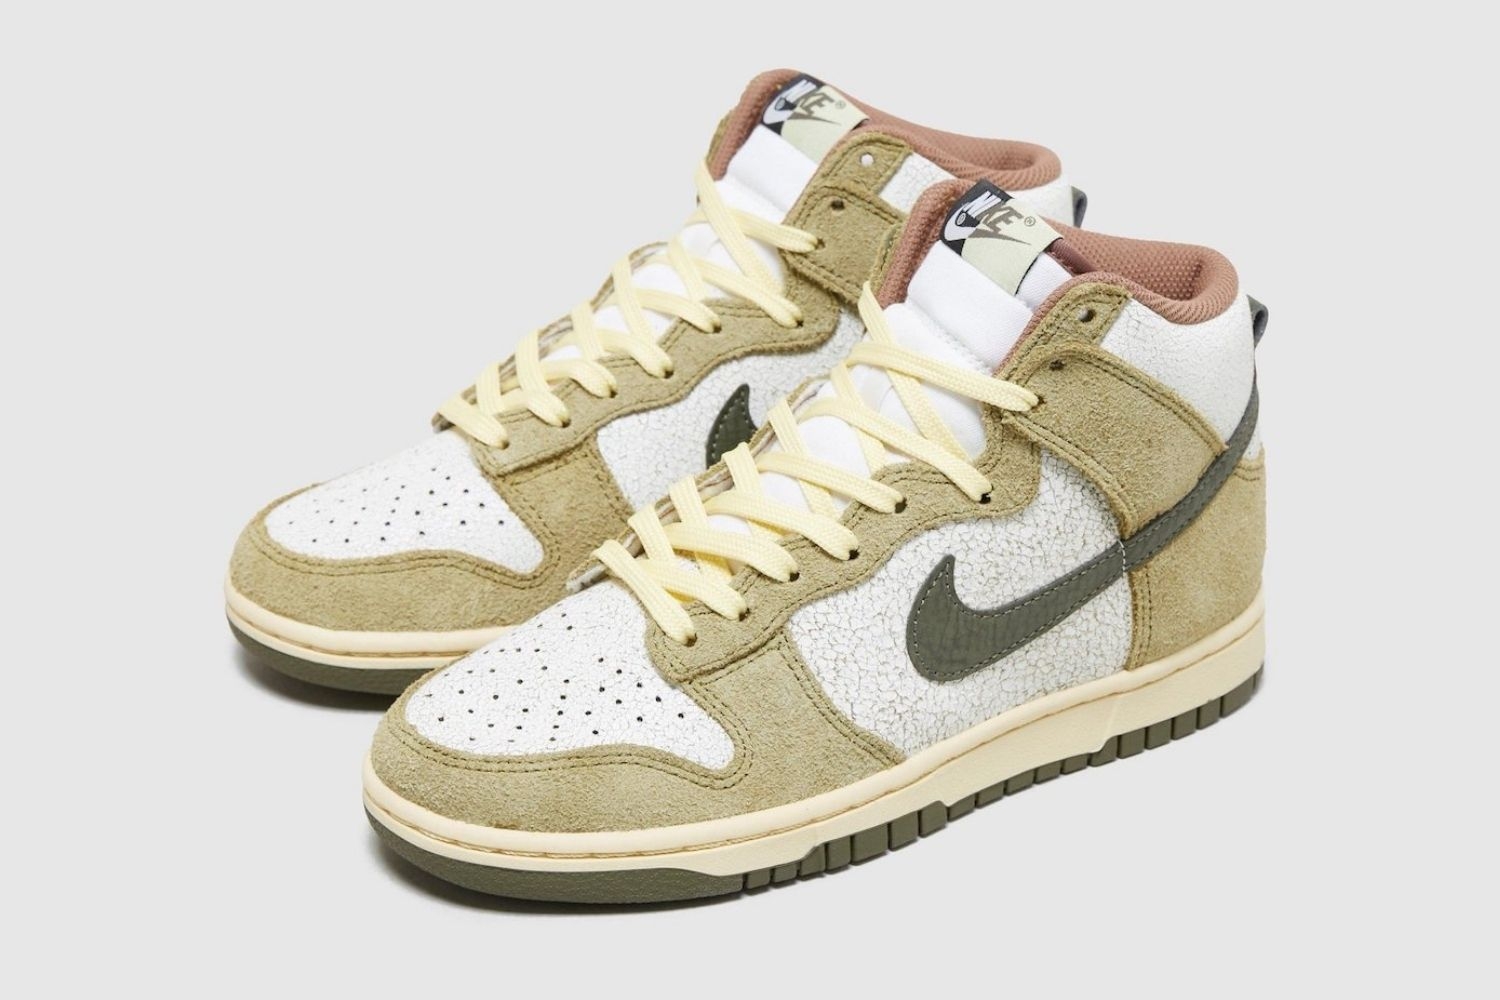 Nike releases Dunk High 'Re-Raw' with worn look